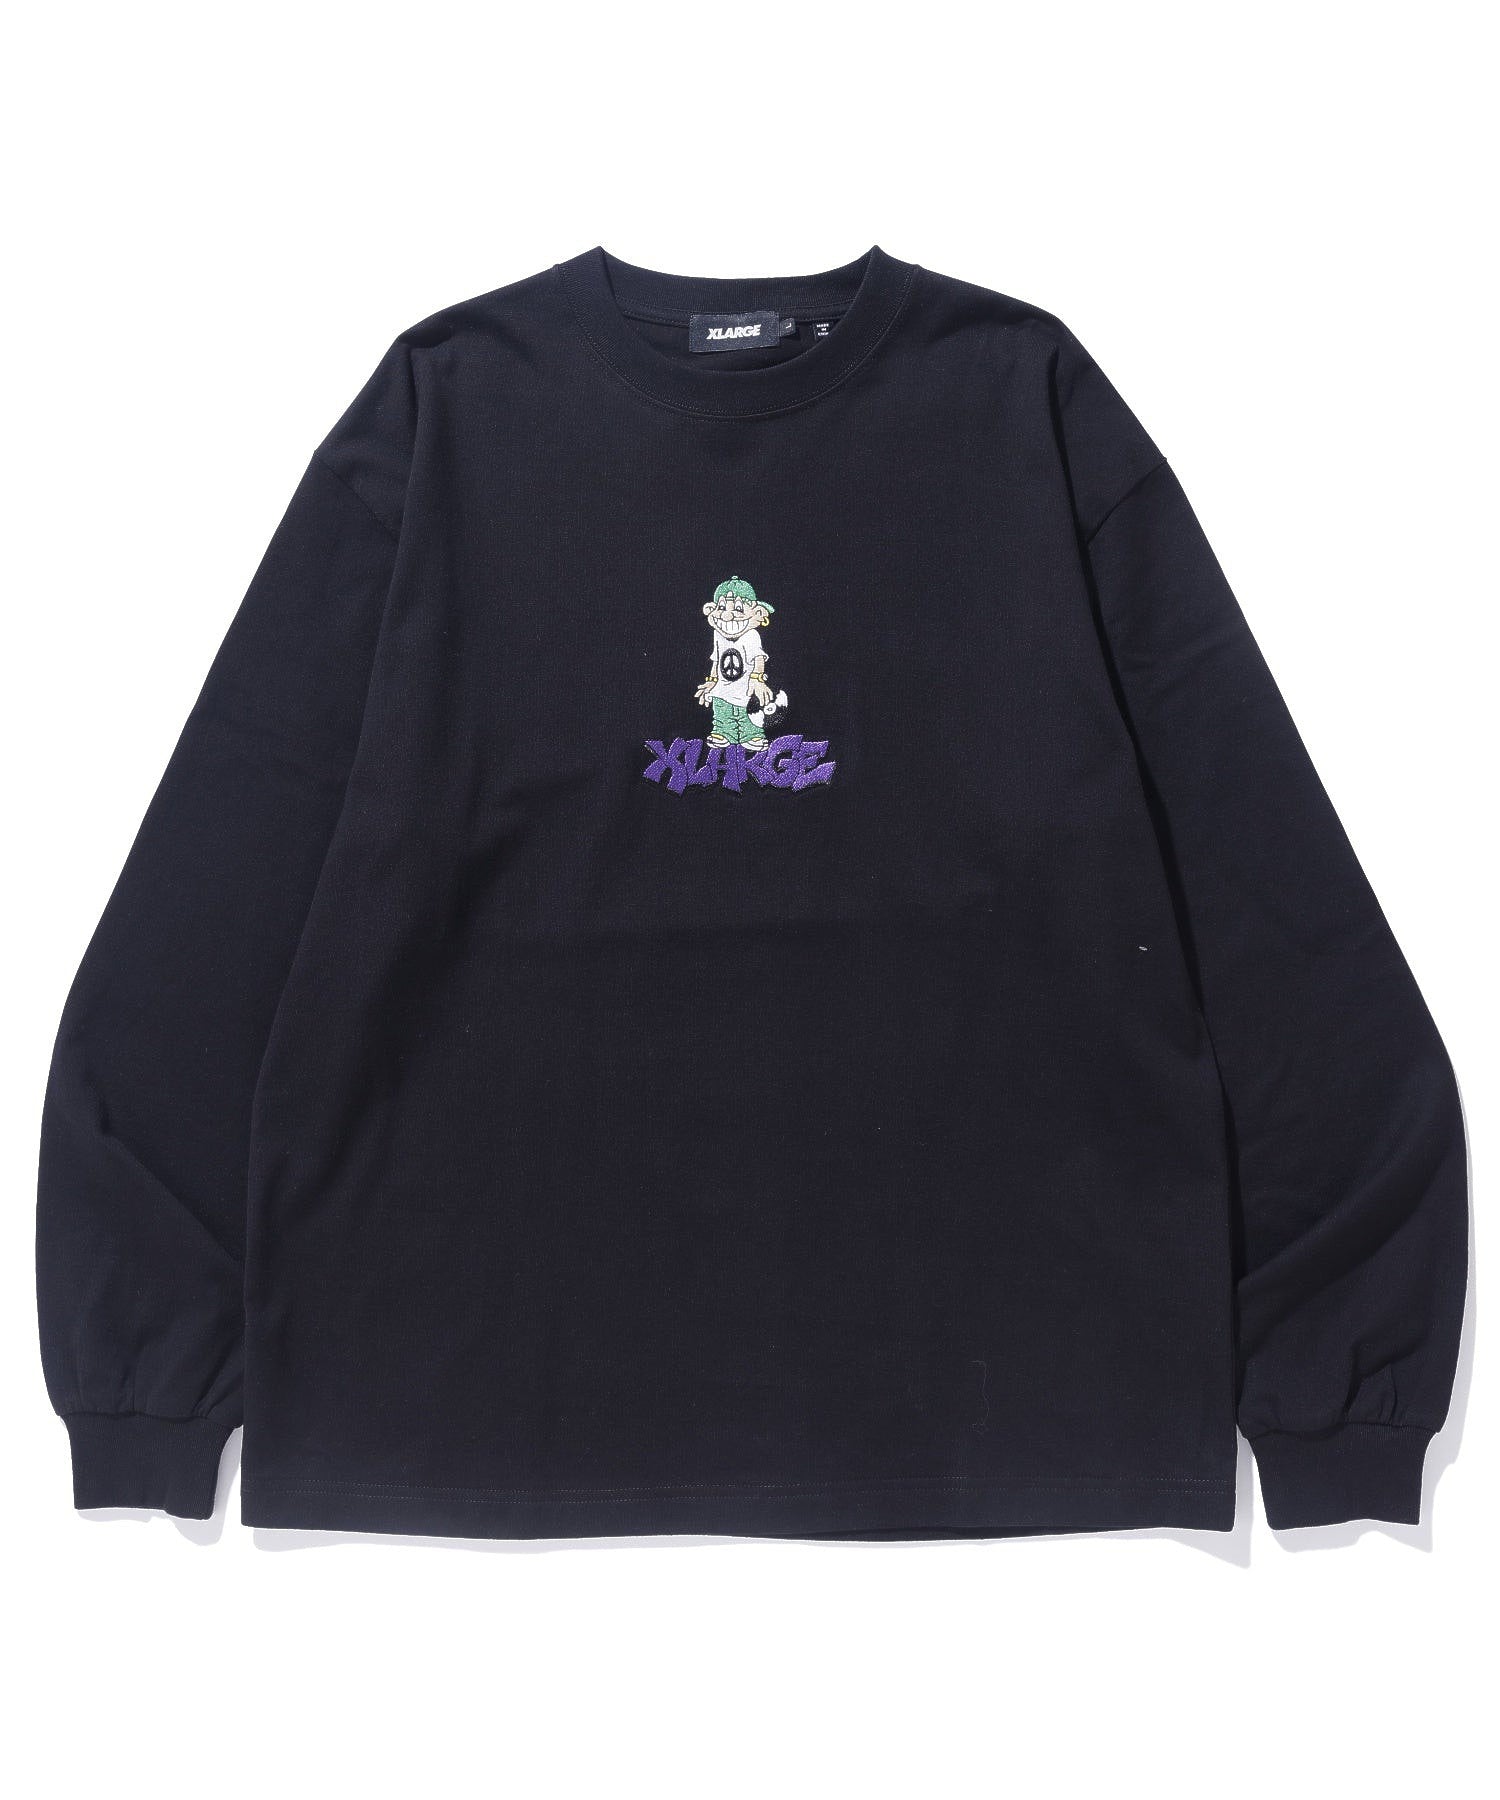 MUSIC LOVER L/S TEE XLARGE